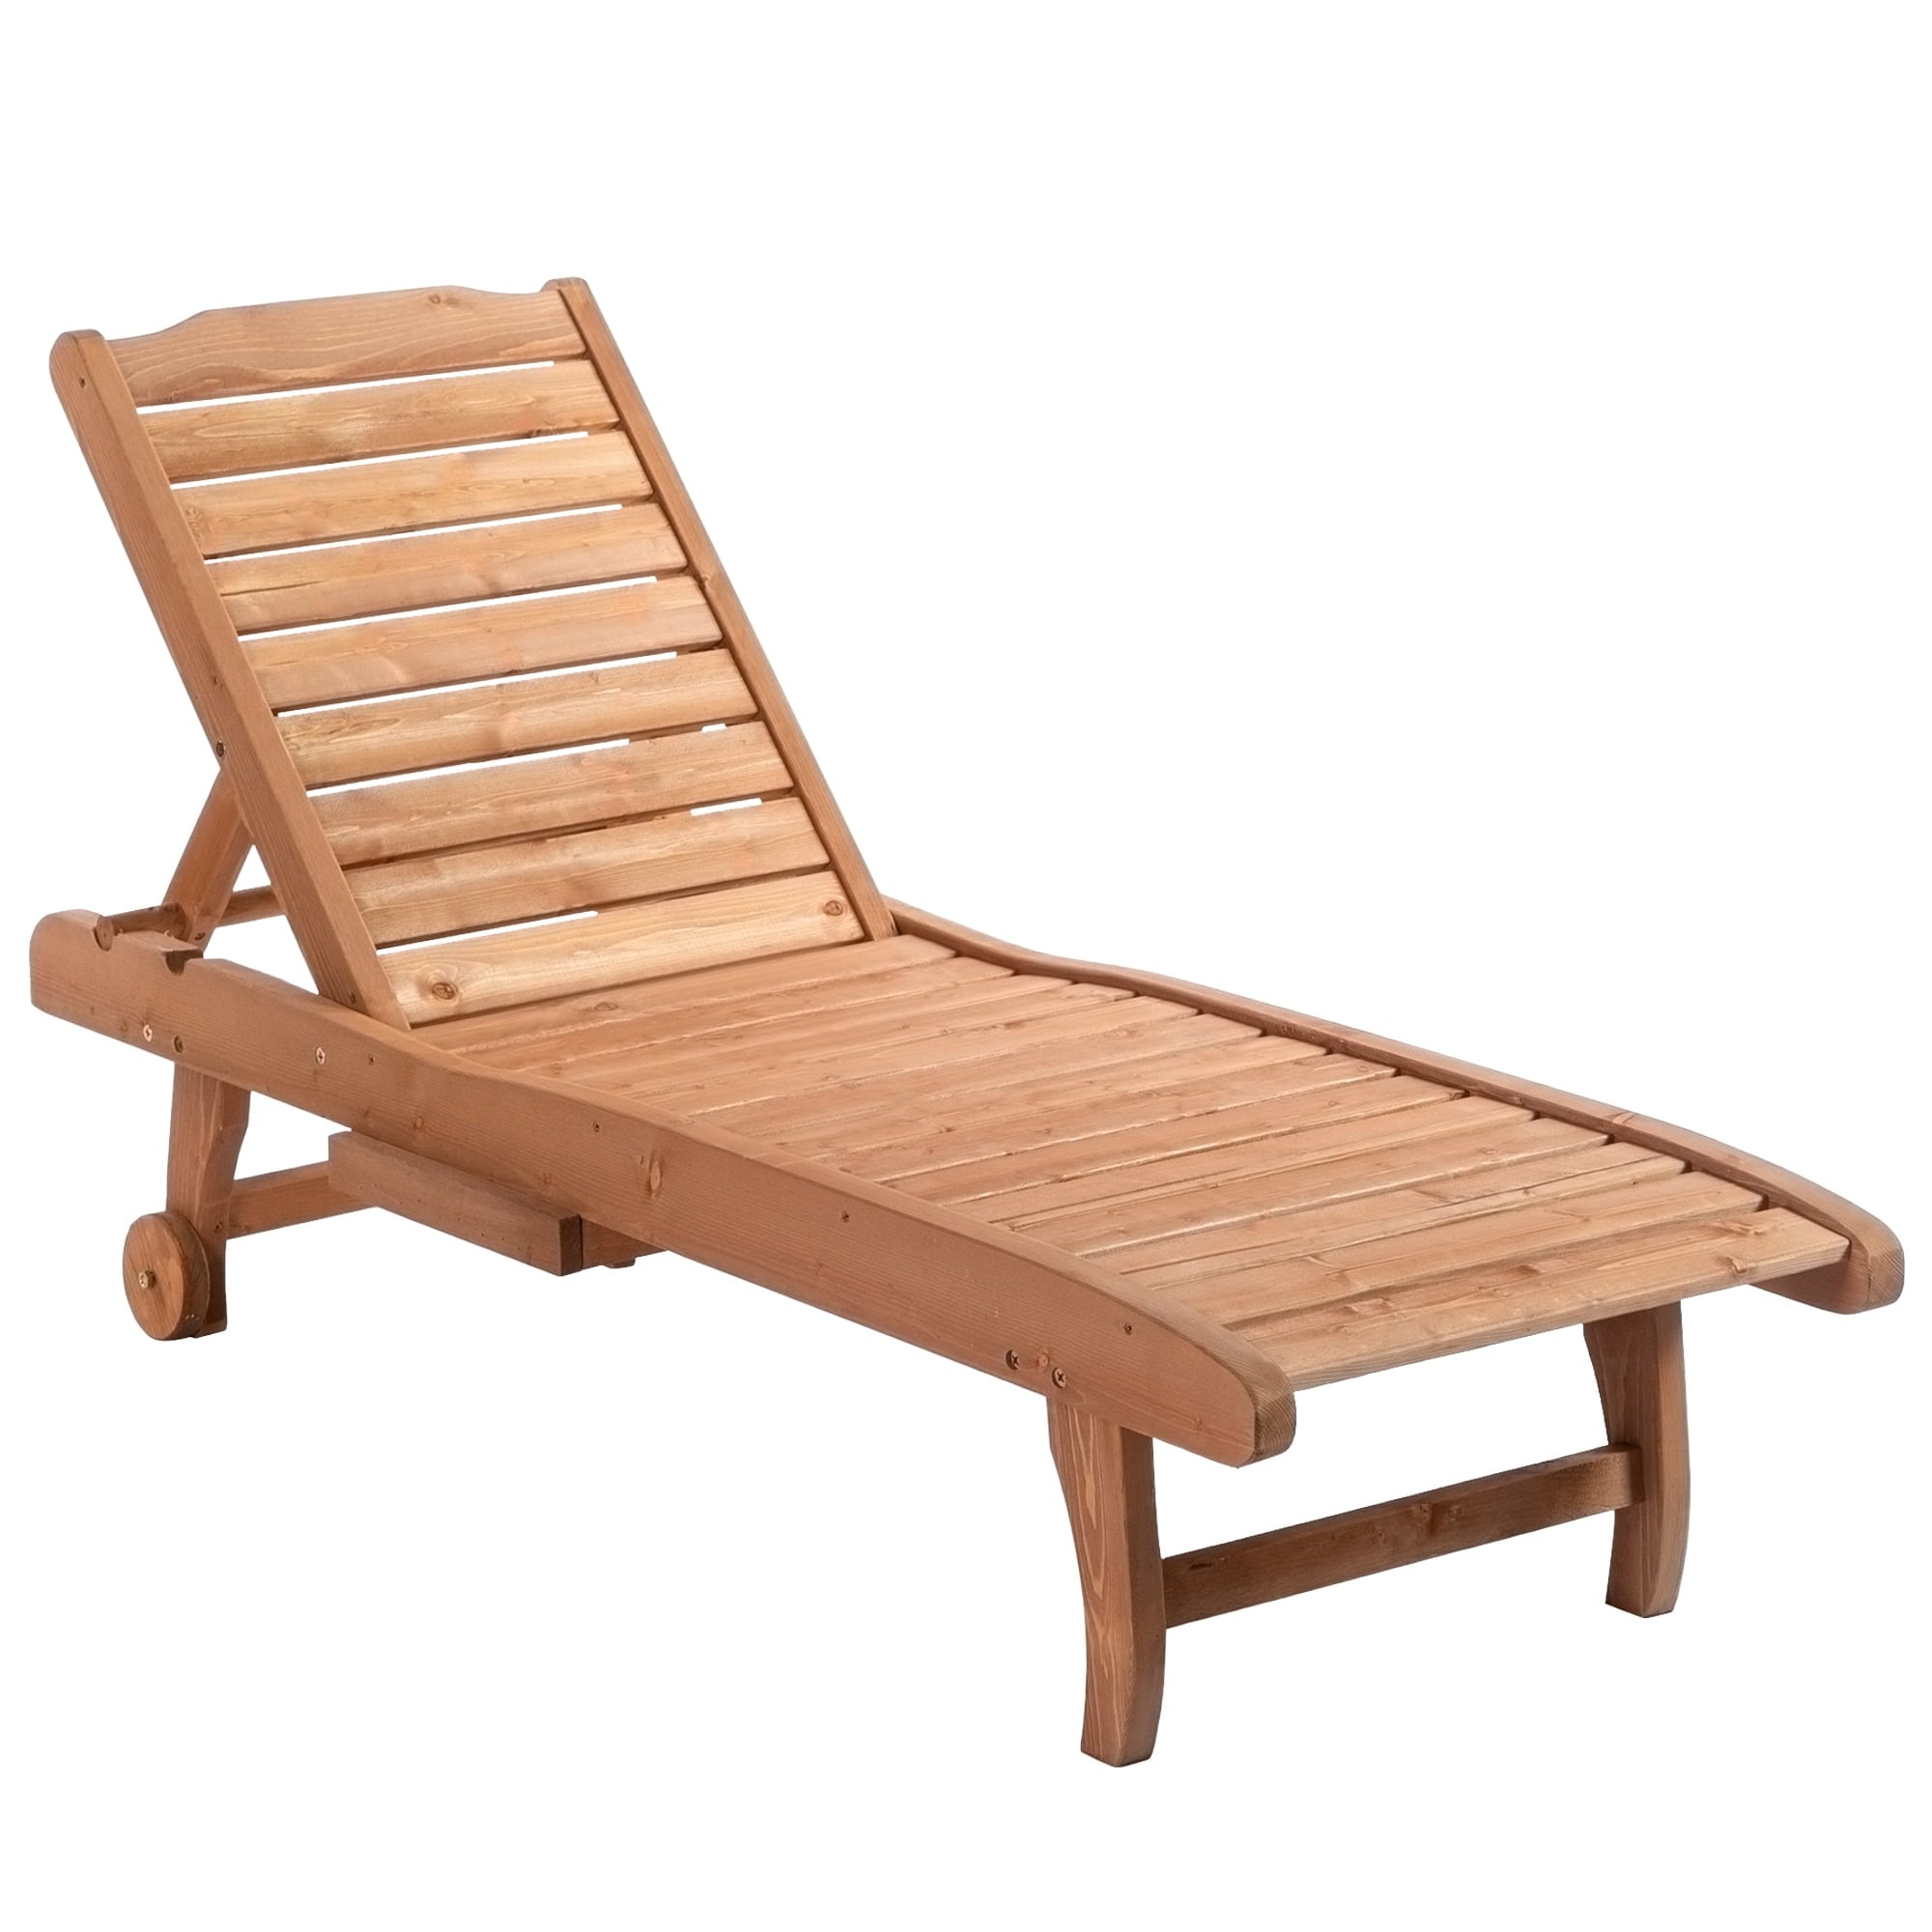 Outsunny Reclining Wood Outdoor Chaise Lounge